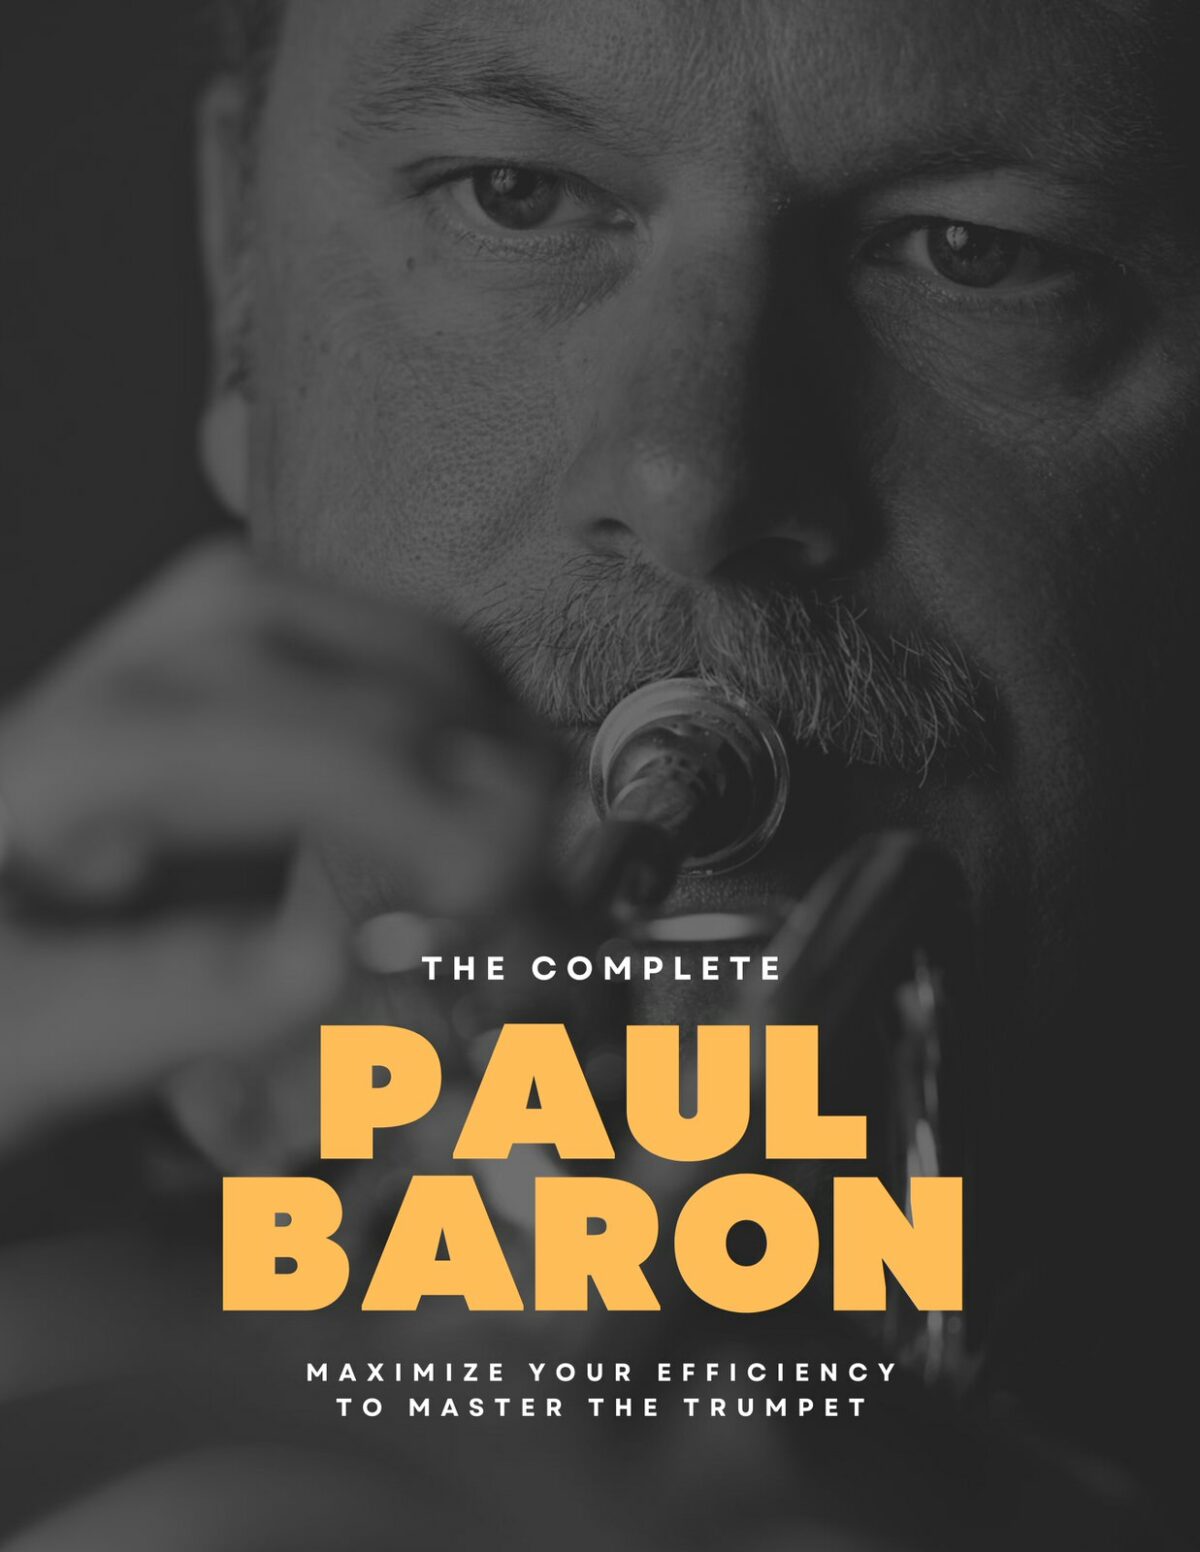 The Complete Paul Baron